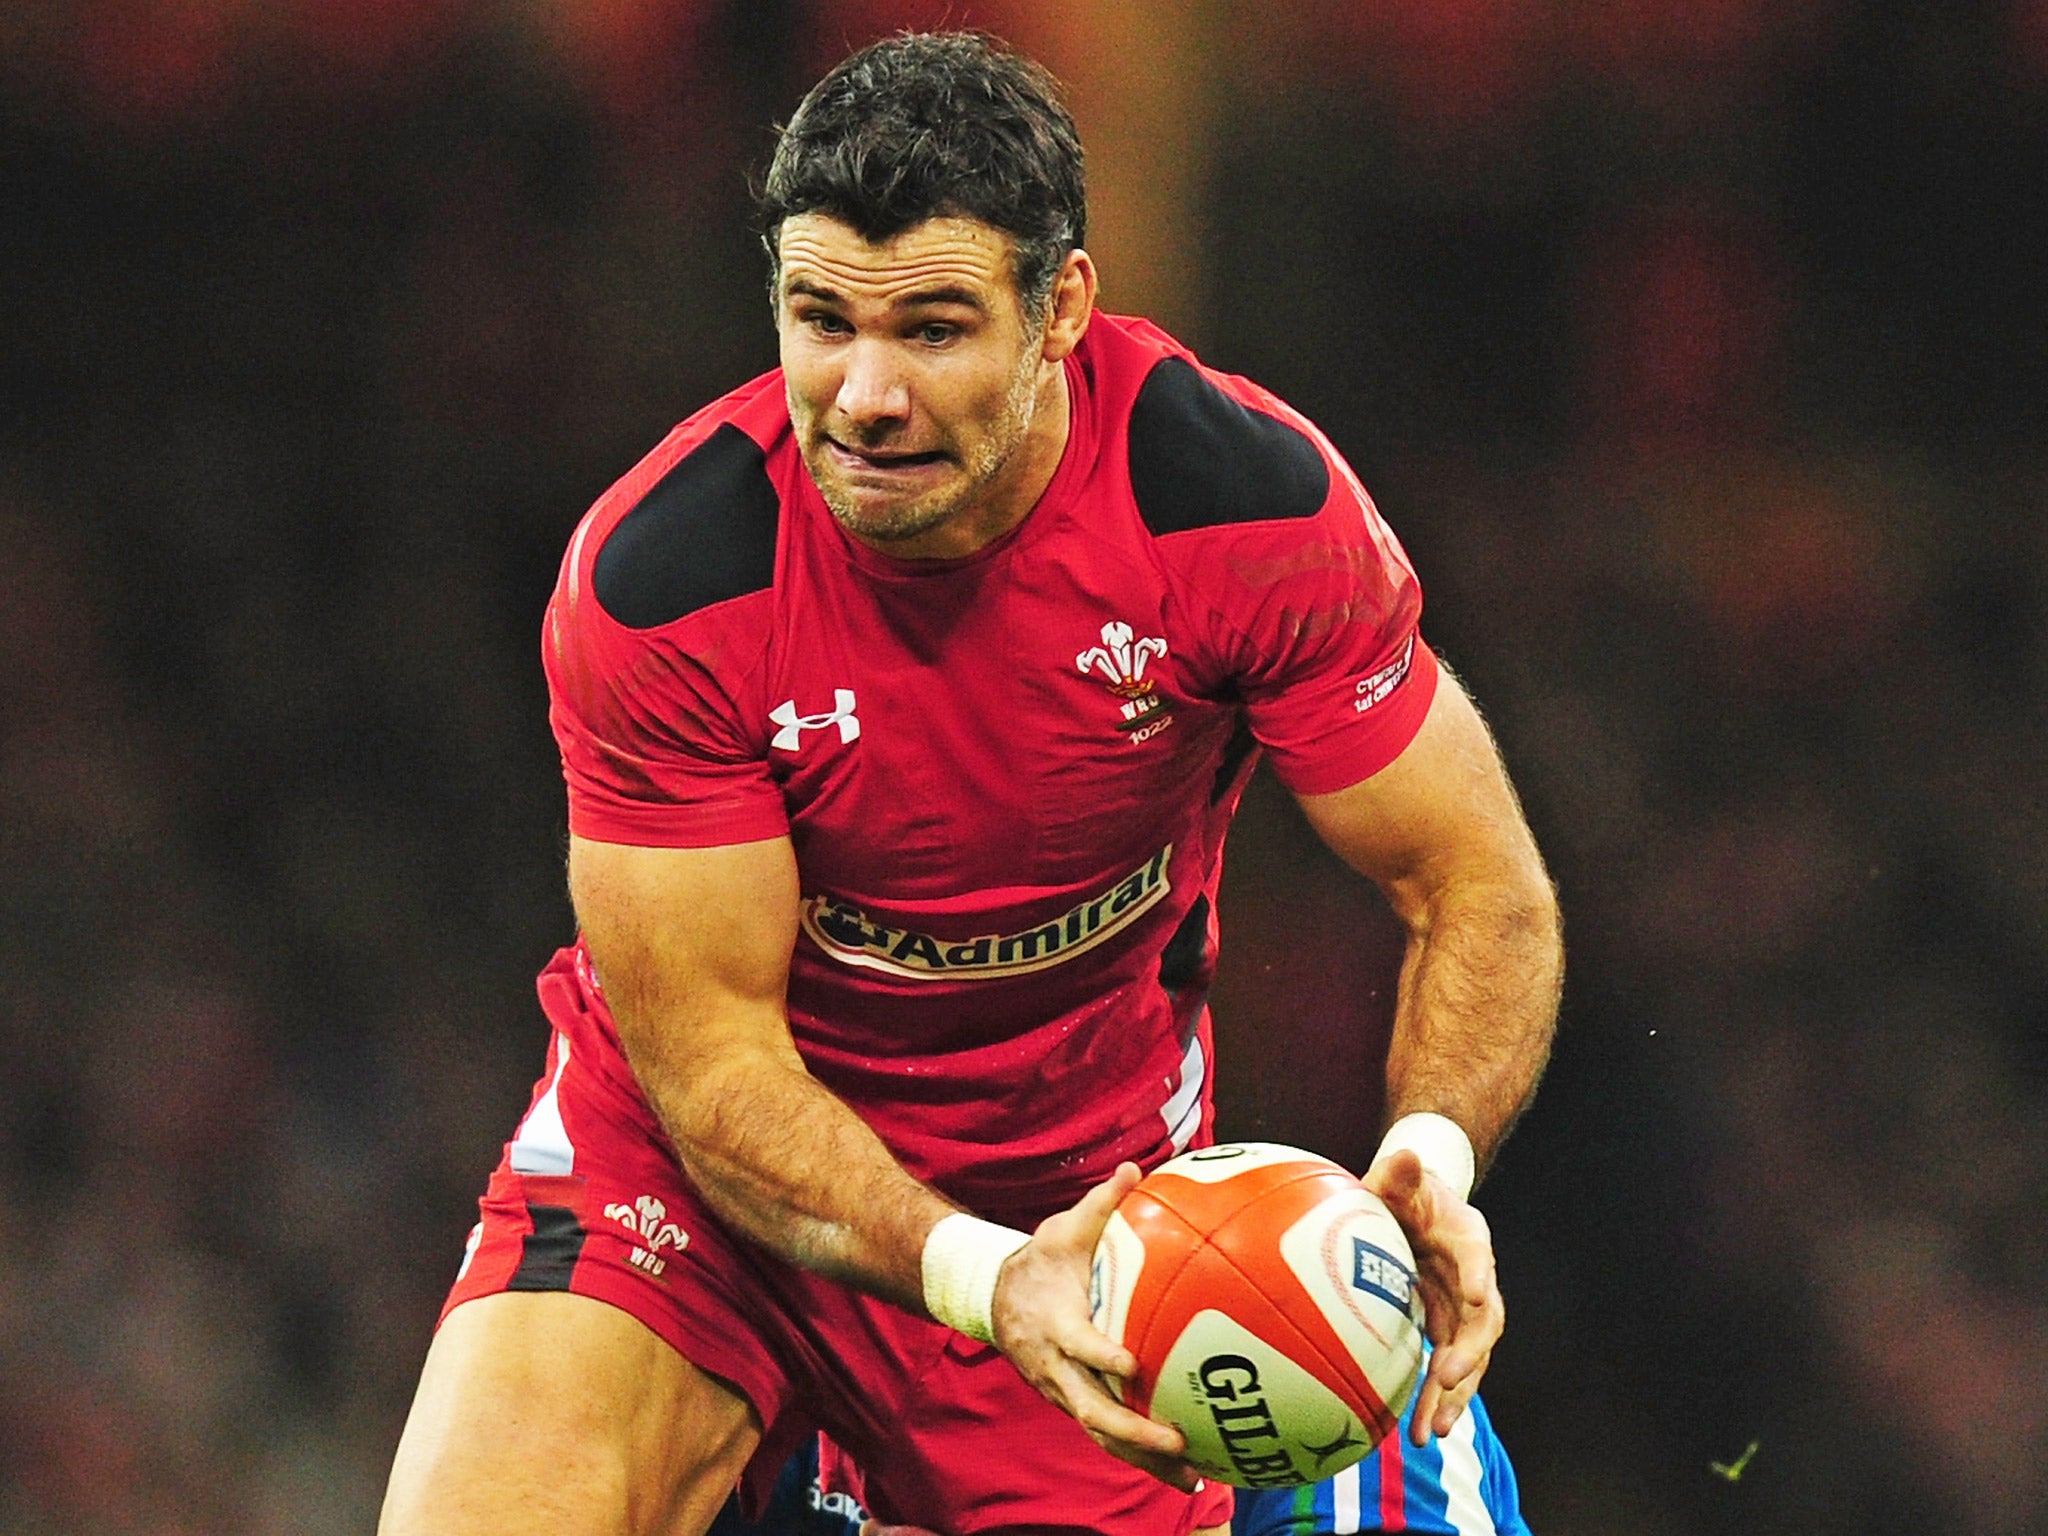 Mike Phillips in action for Wales earlier in the year